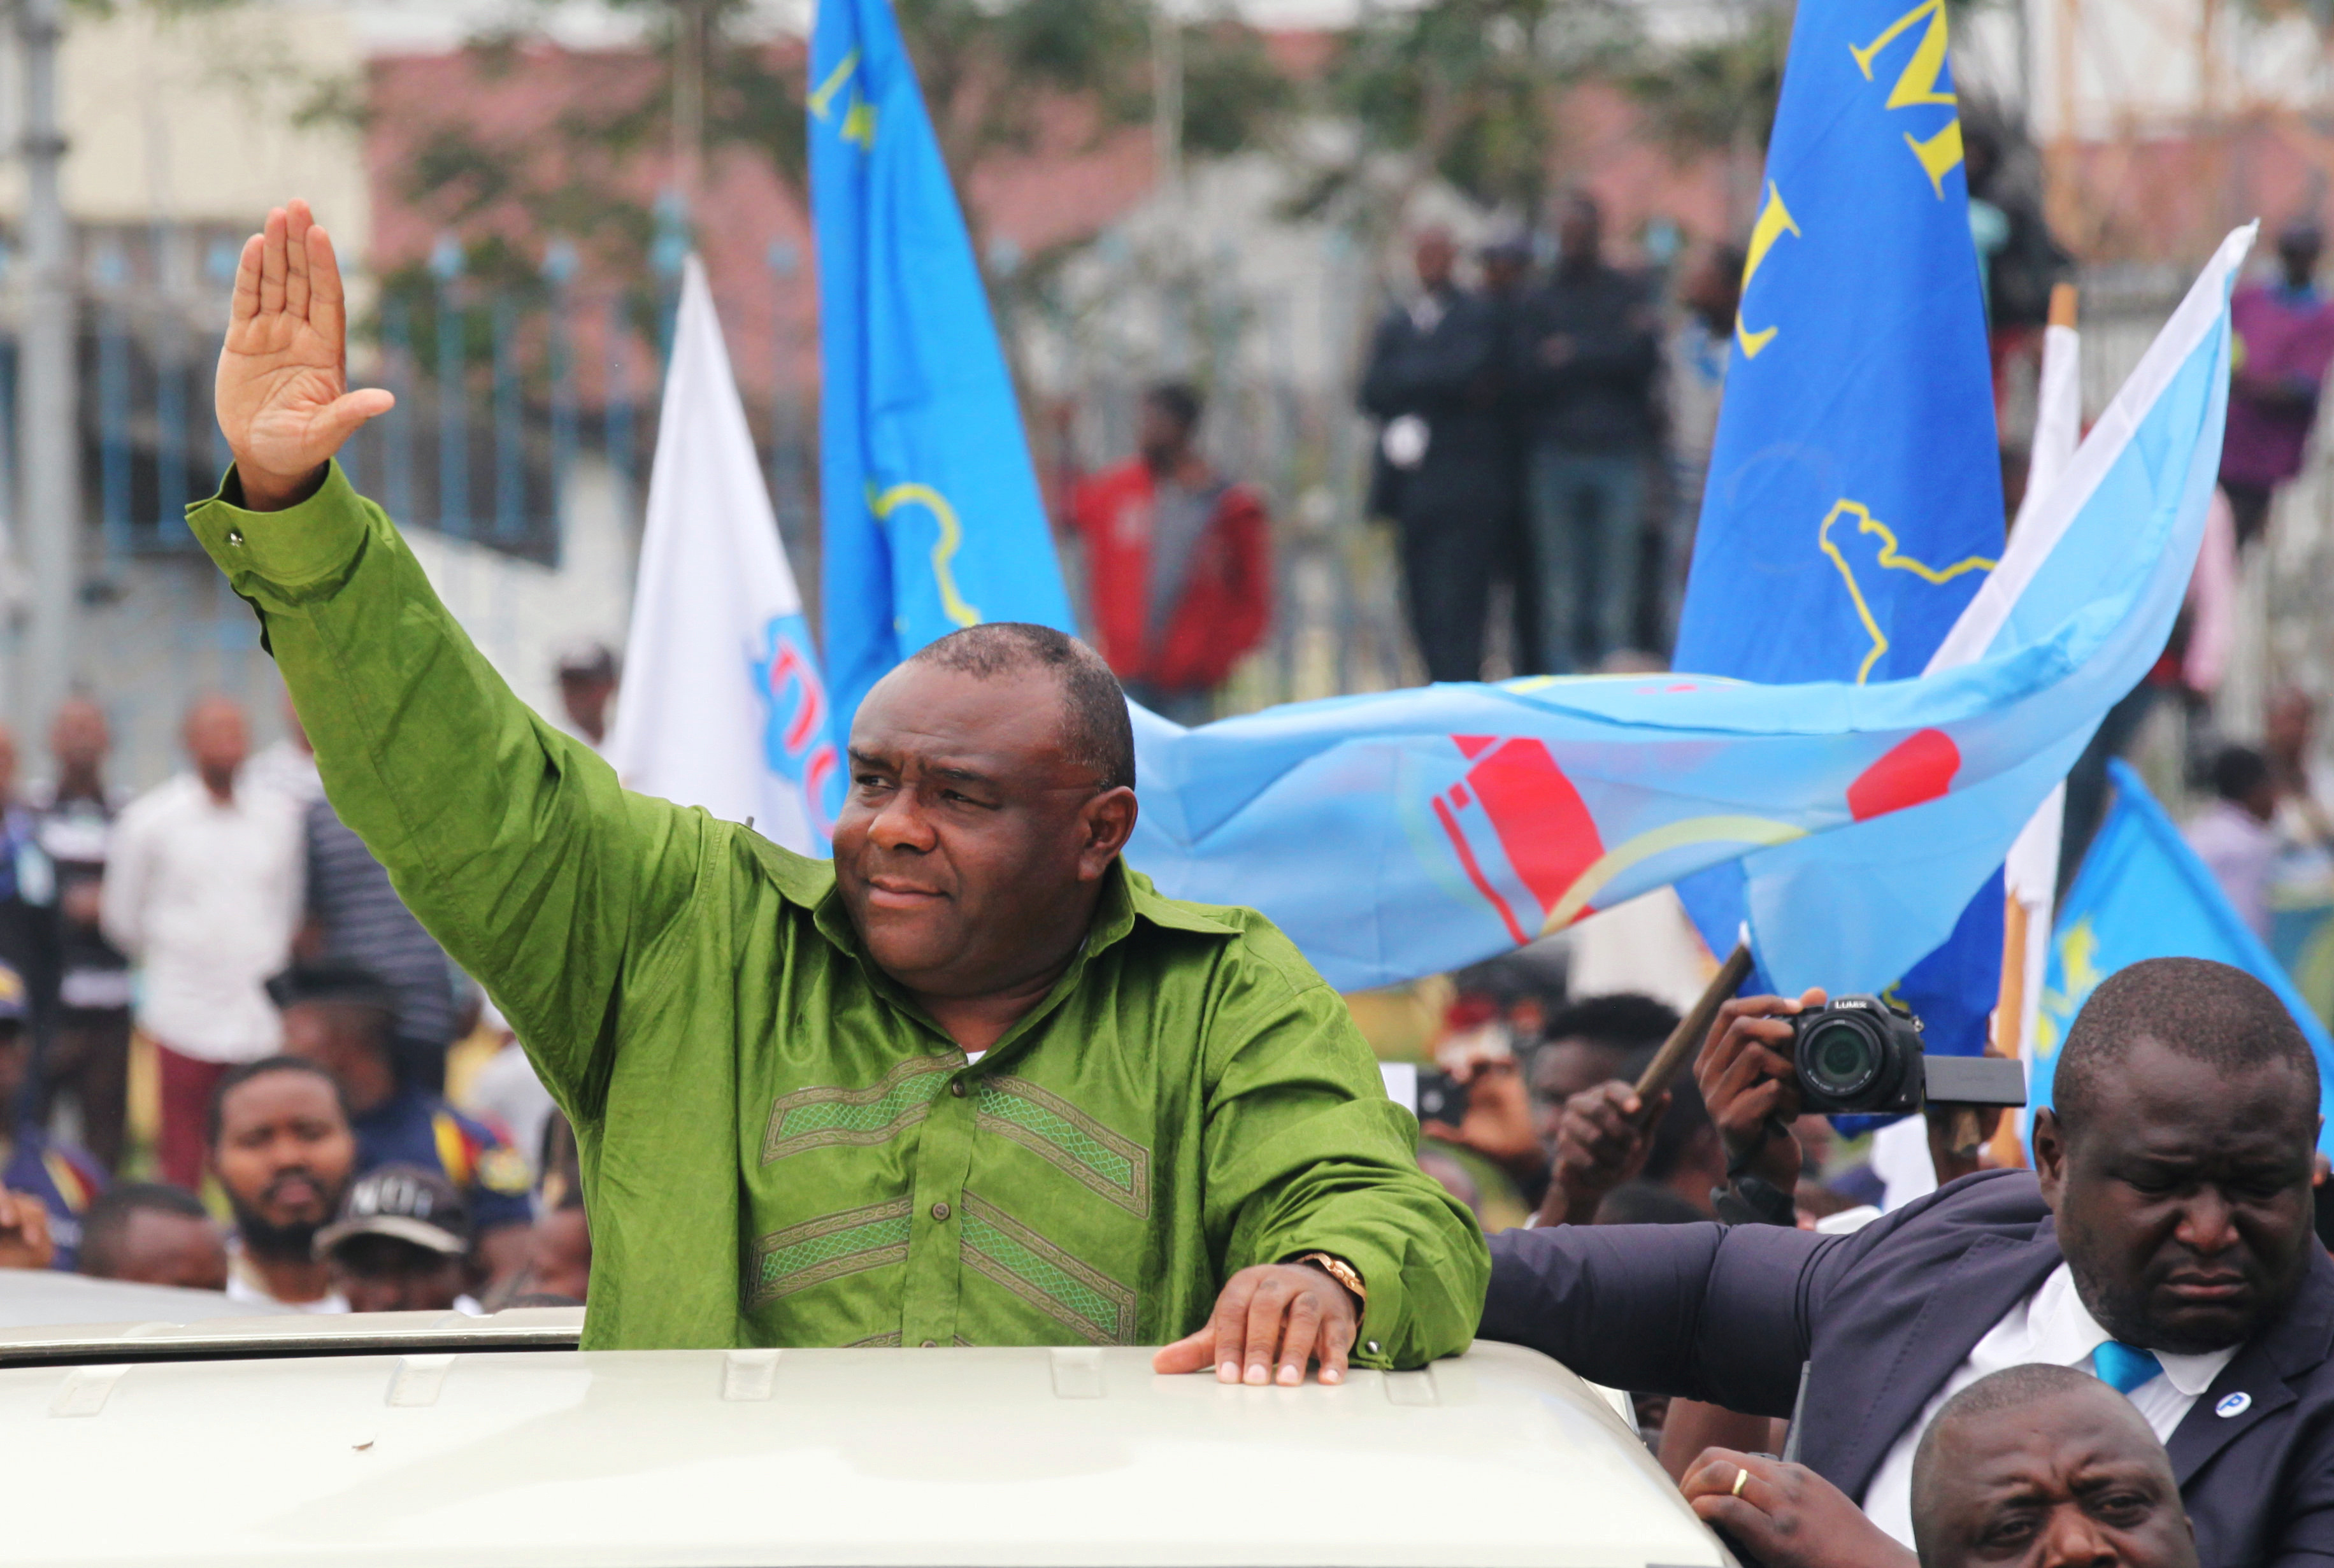 Congolese opposition leader Jean-Pierre Bemba of the Movement for the Liberation of the Congo (MLC) waves to his supporters as he arrives at the N'djili International Airport in Kinshasa